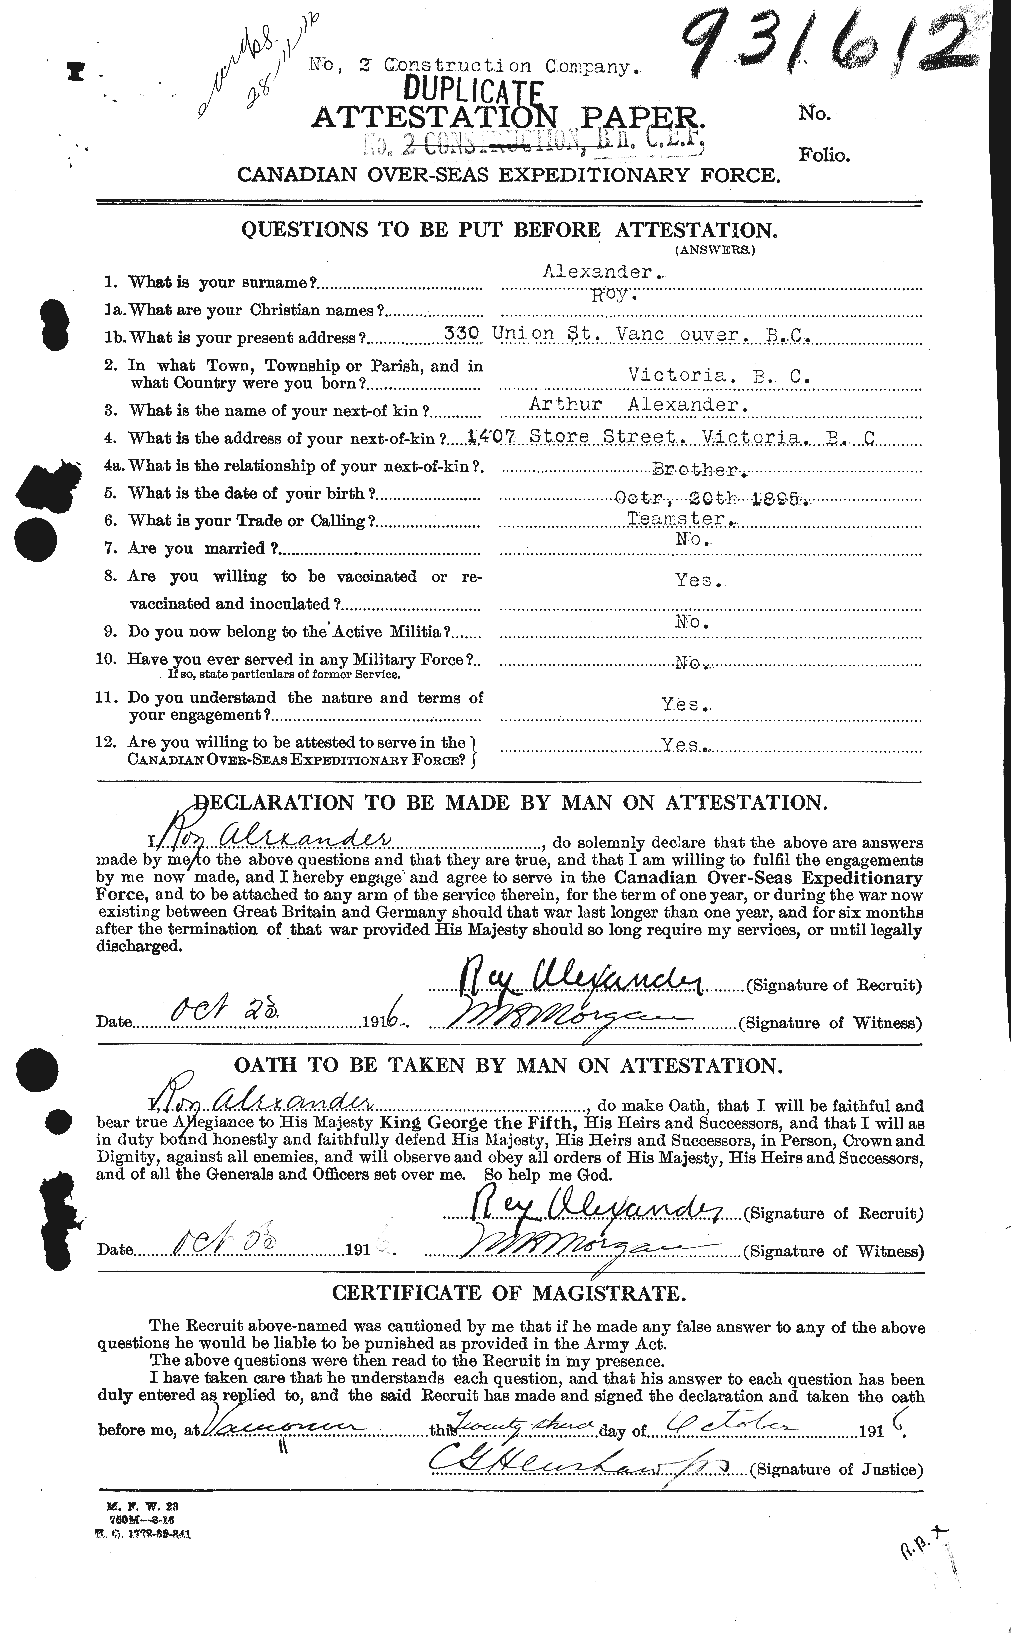 Personnel Records of the First World War - CEF 204350a